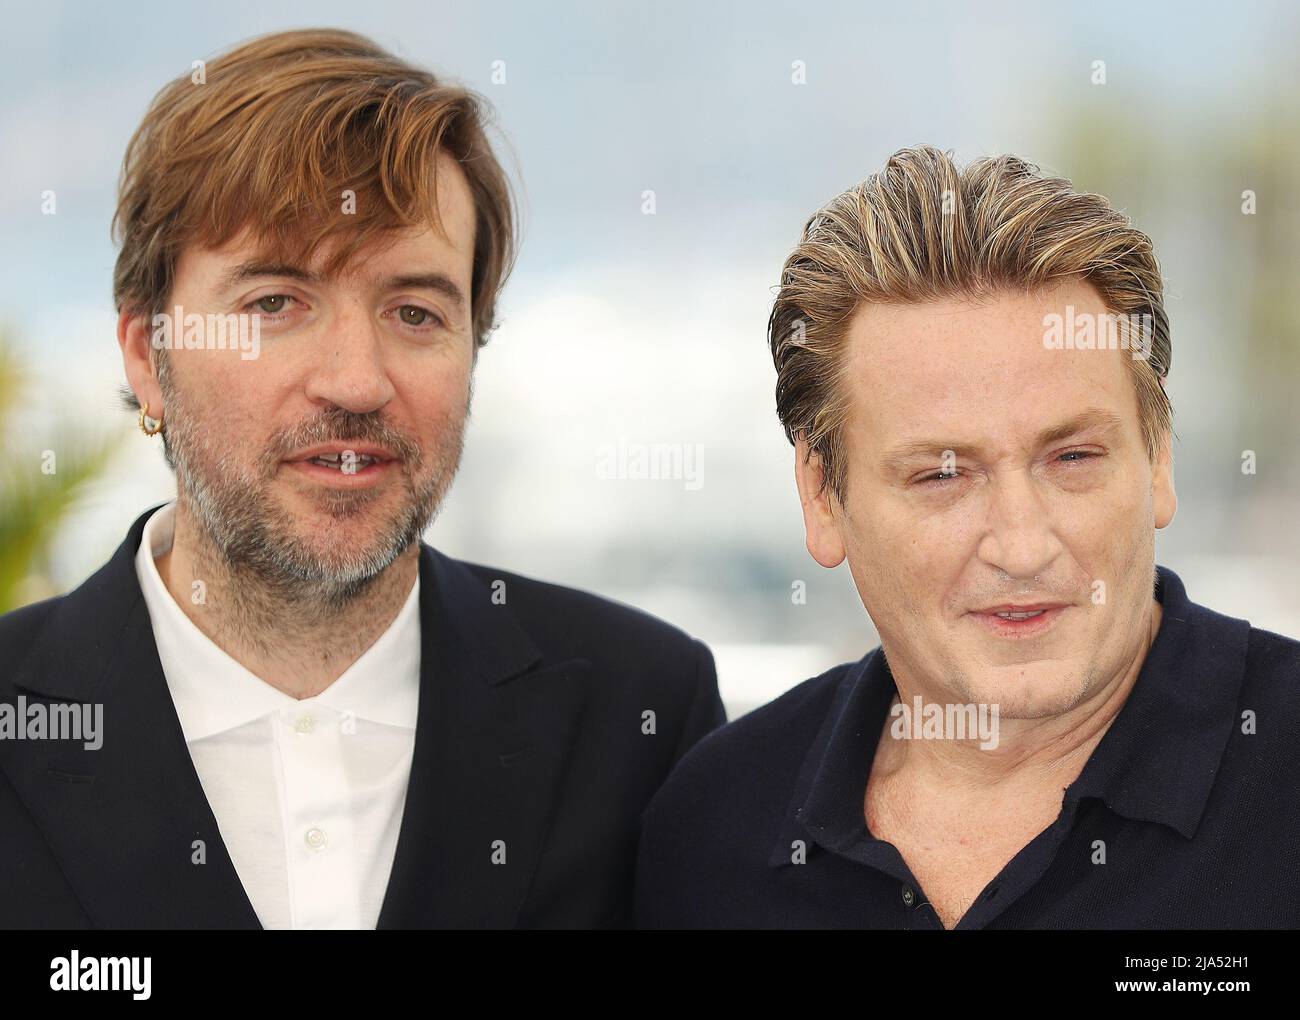 Cannes, France. 27th May, 2022. Spanish director Albert Serra (L) and French actor Benoit Magimel pose during a photocall for the film 'Pacifiction' during the 75th edition of the Cannes Film Festival in Cannes, southern France, on May 27, 2022. Credit: Gao Jing/Xinhua/Alamy Live News Stock Photo